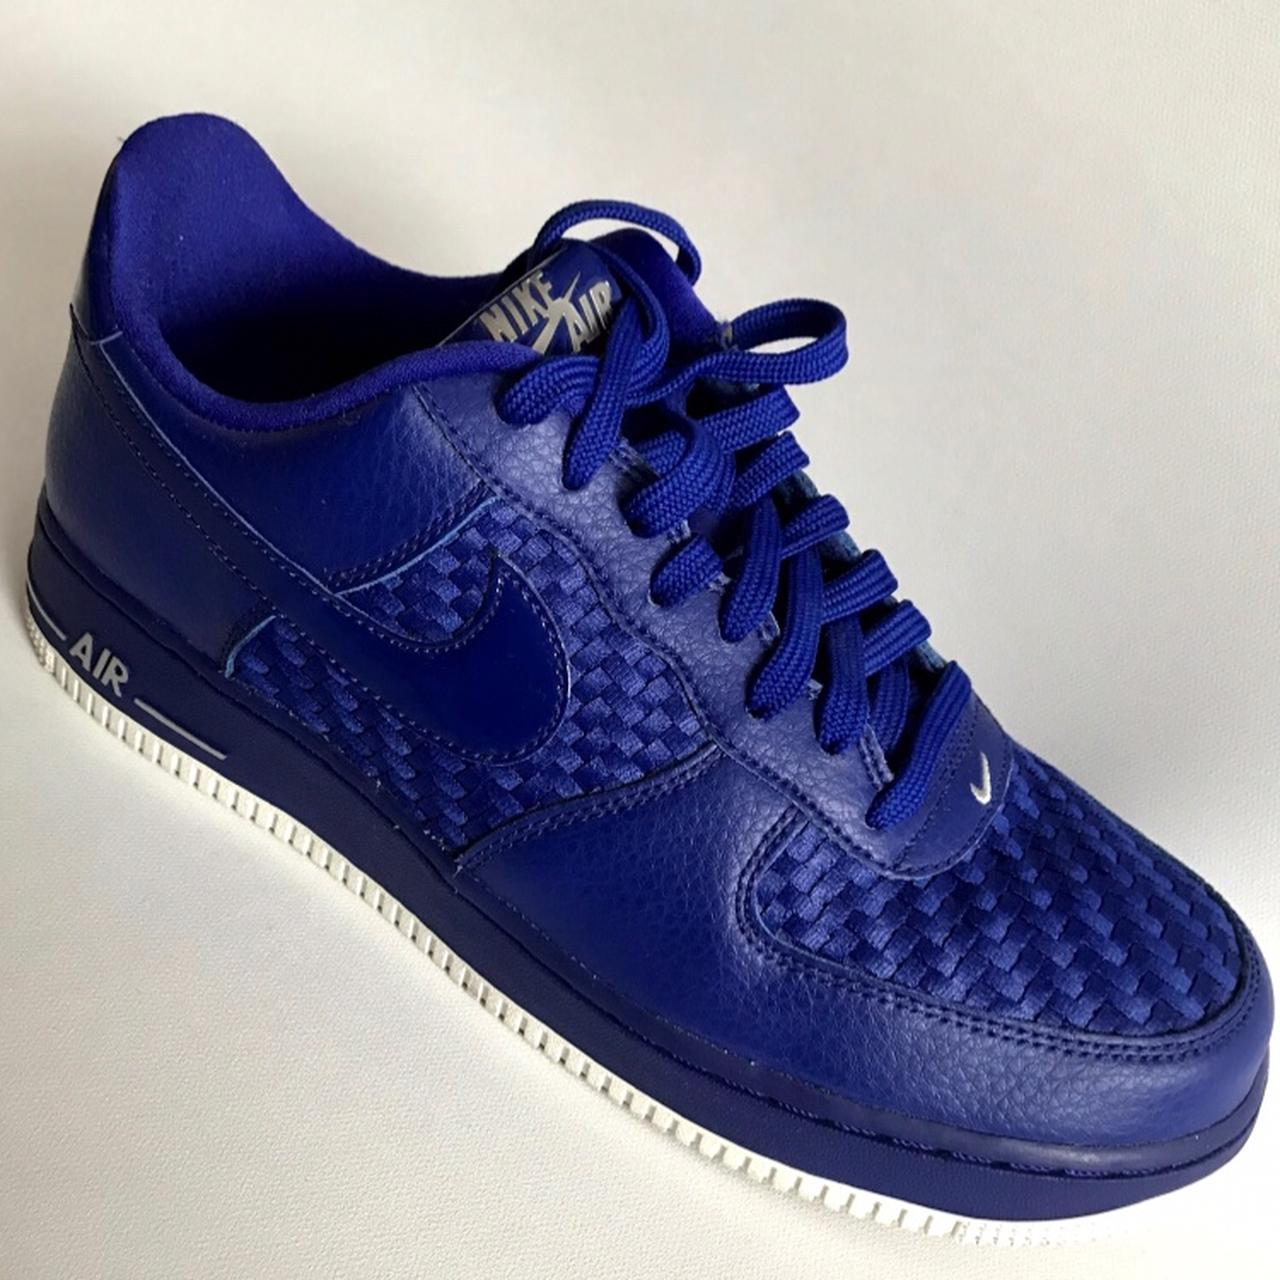 Nike Air Force 1 07 LV8 Woven Concord Blue Sneaker